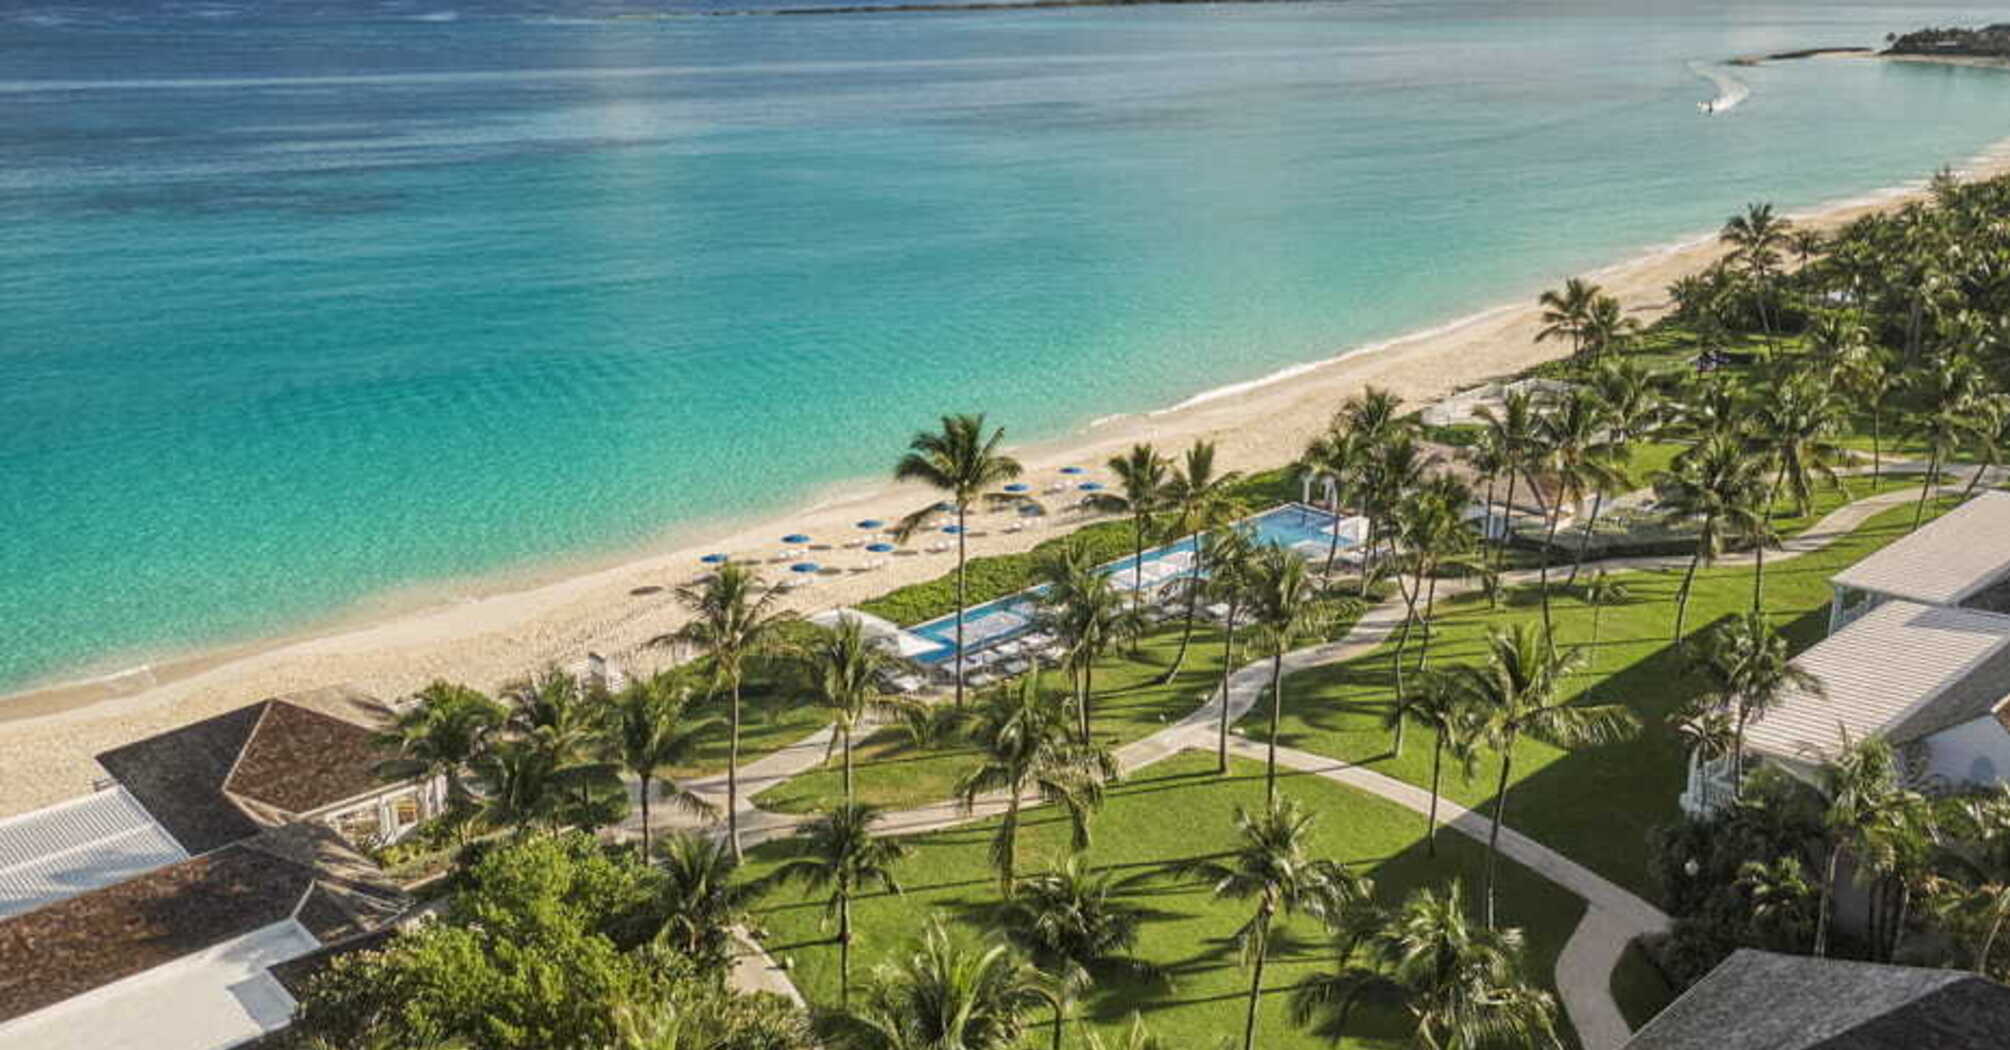 7 luxury hotels in the Bahamas: from secluded oceanfront villas and historic boutiques to grand resorts